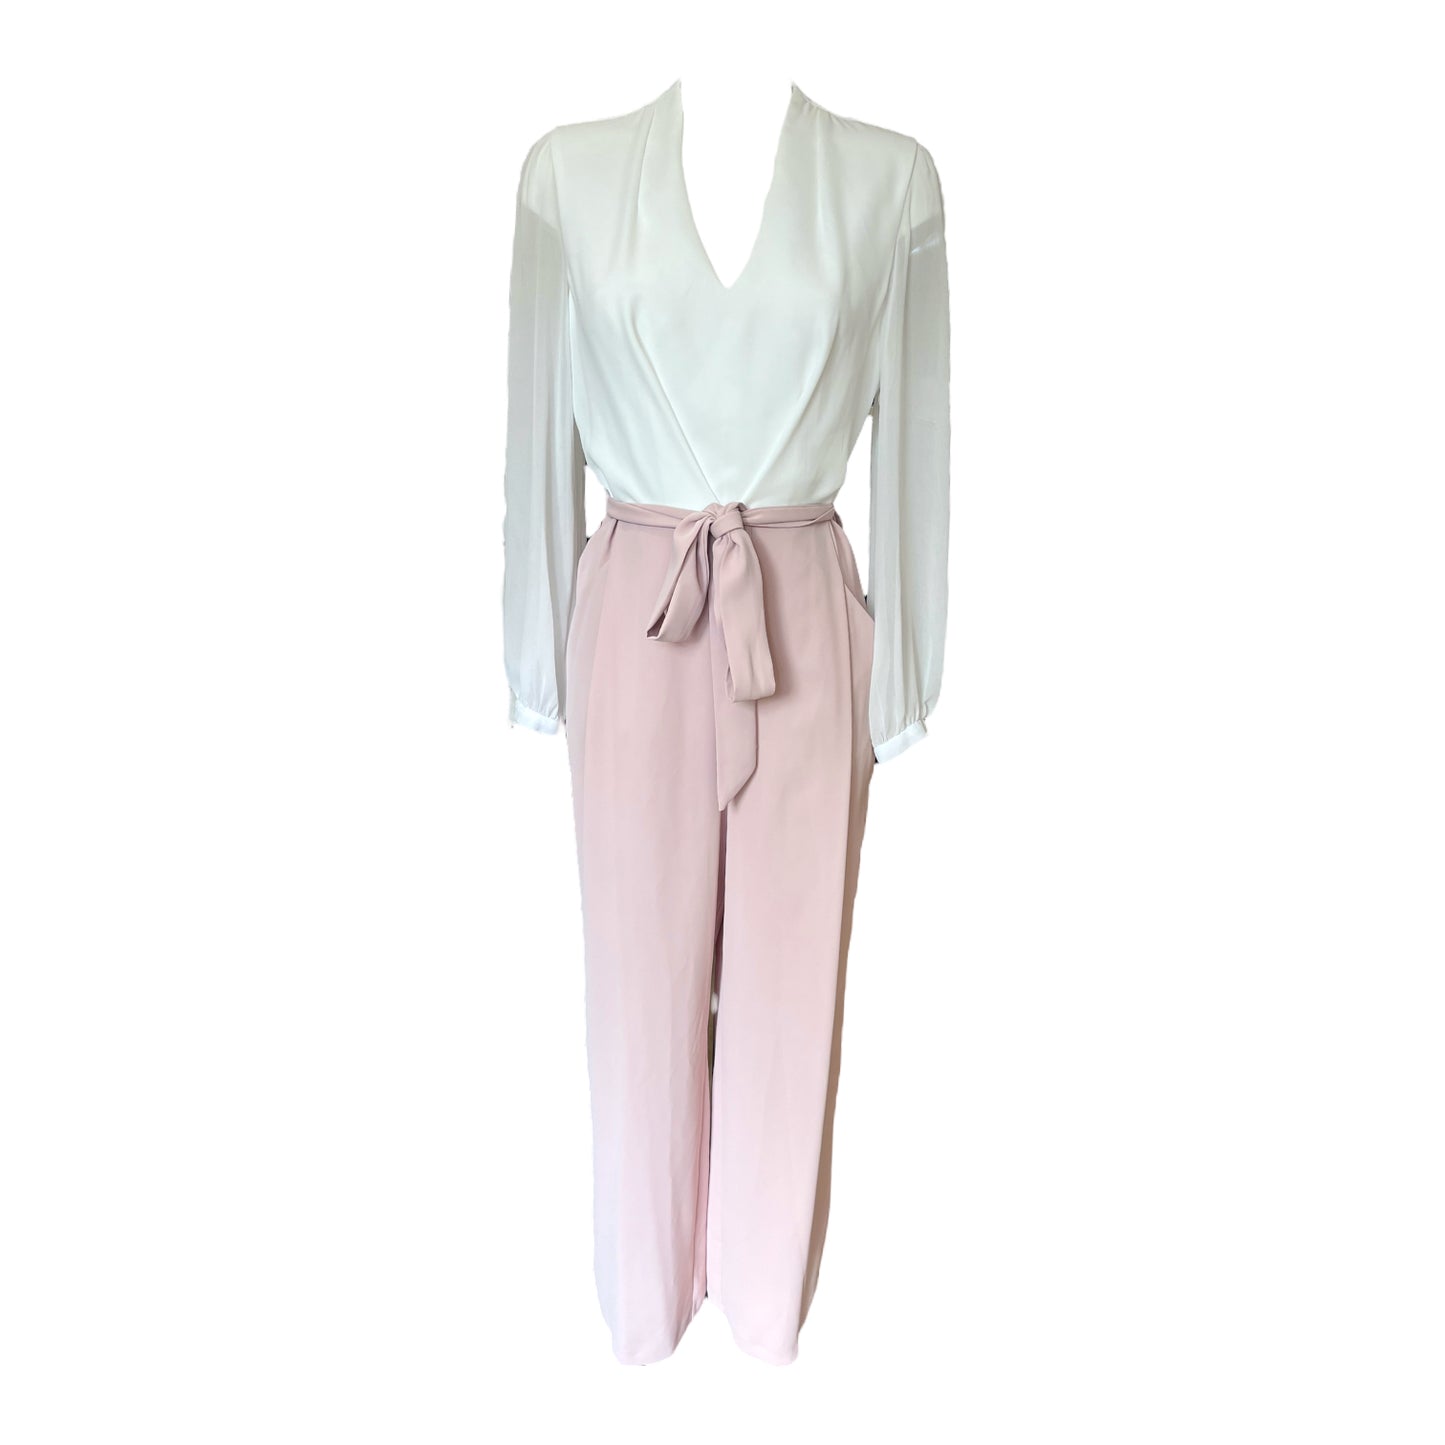 NEW Phase Eight White and Pink Jumpsuit